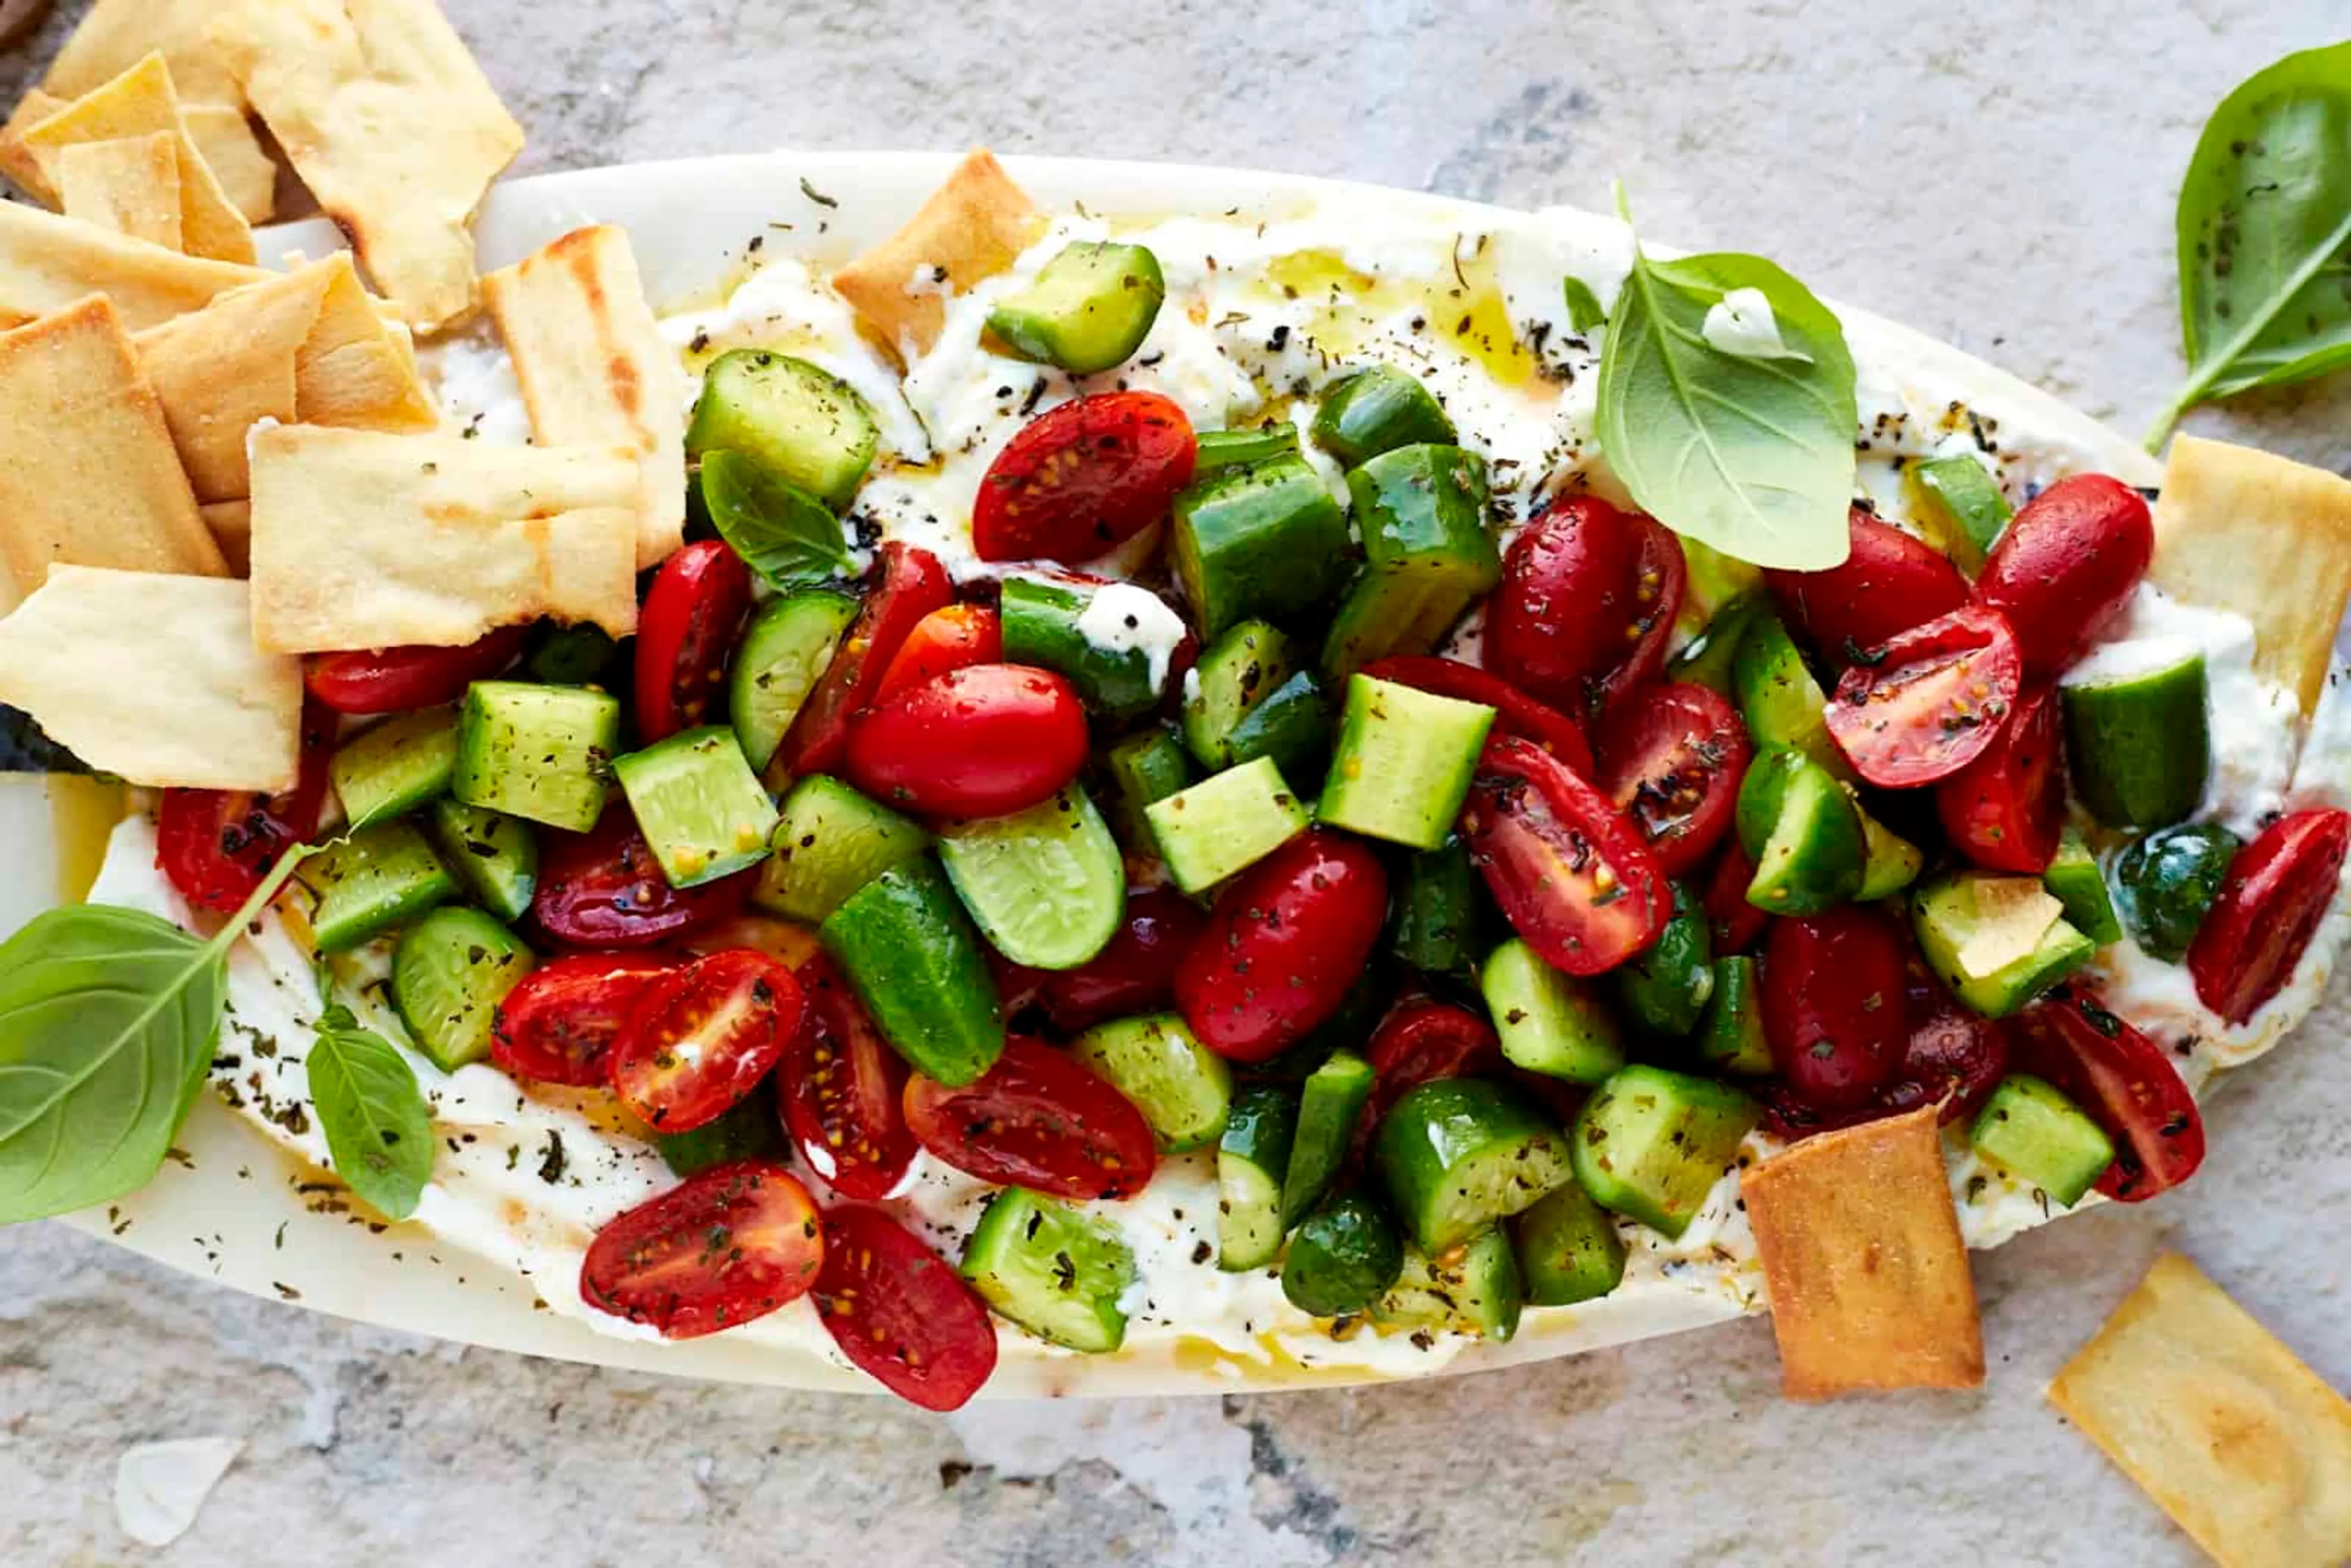 Cucumber and Tomato Salad with Whipped Feta